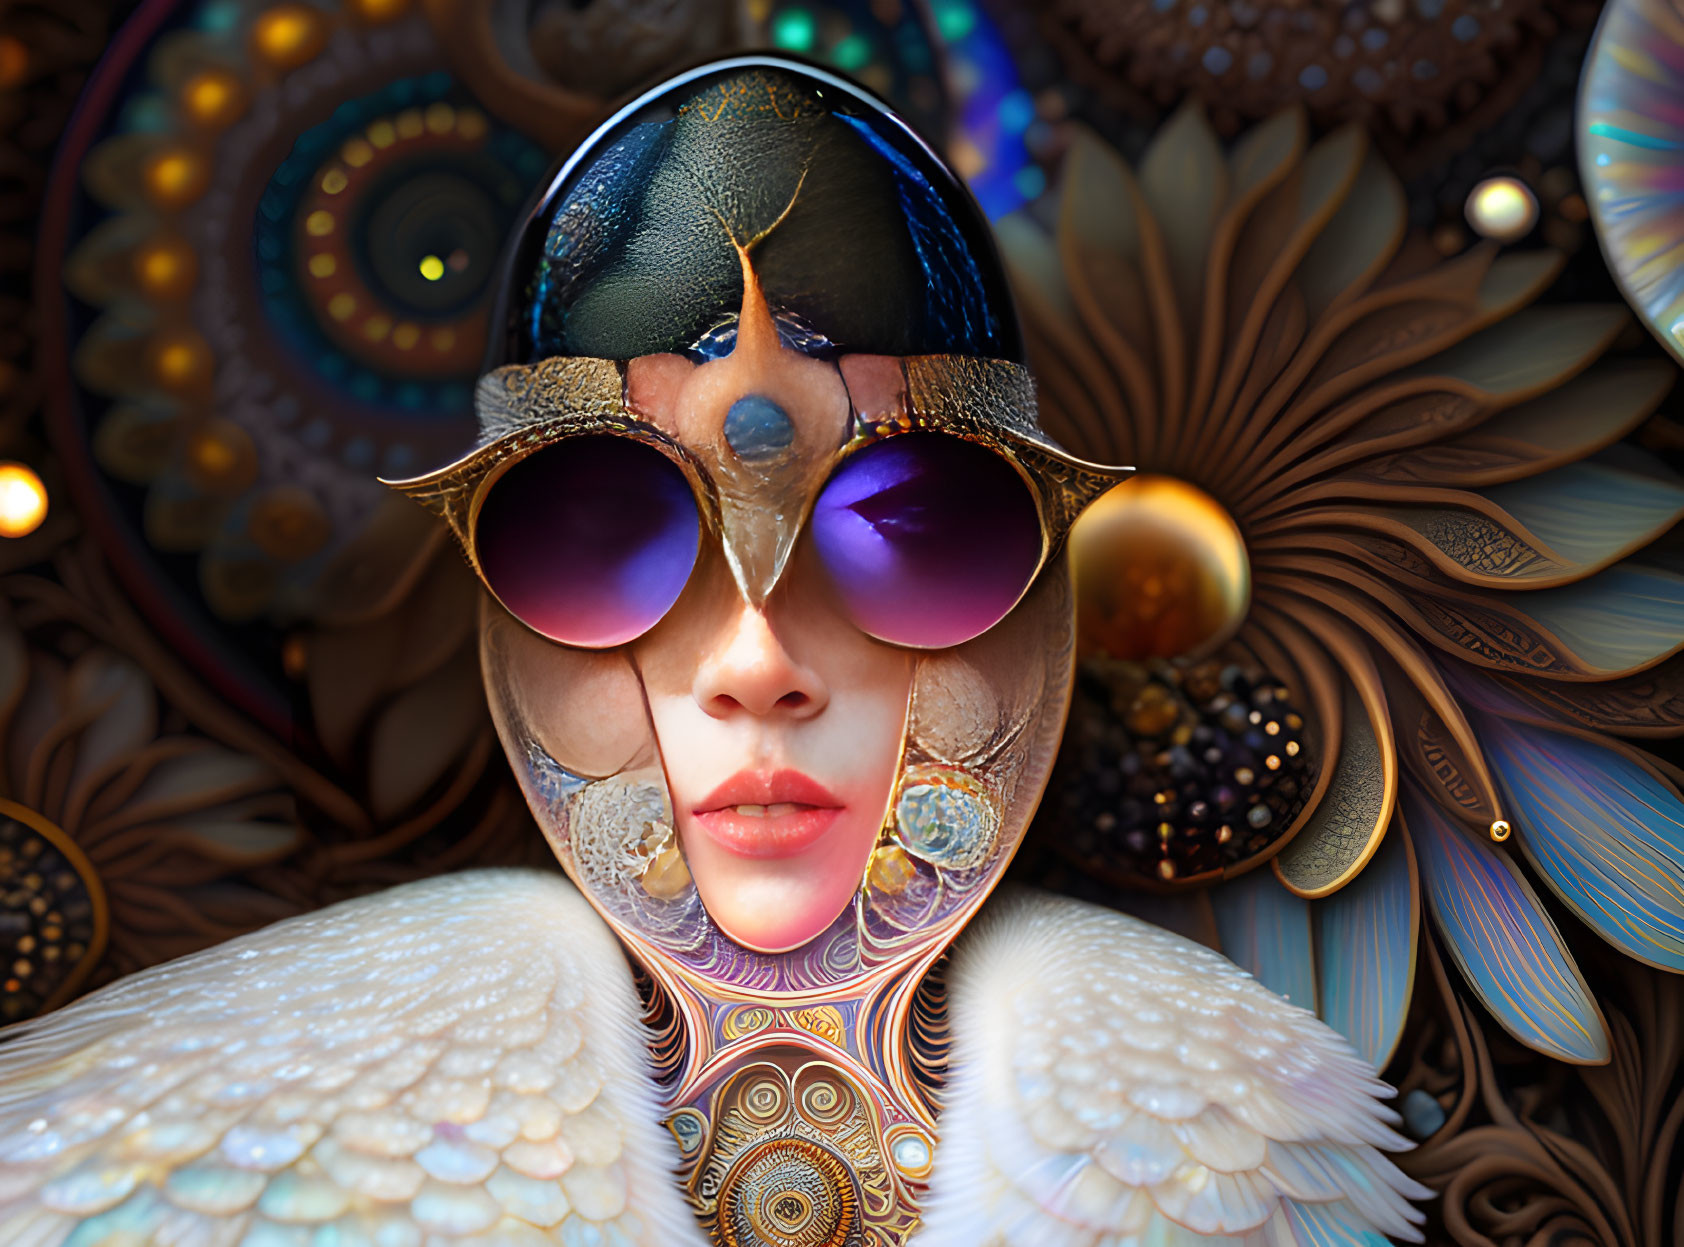 Ornate surreal portrait with circular sunglasses and angelic wings